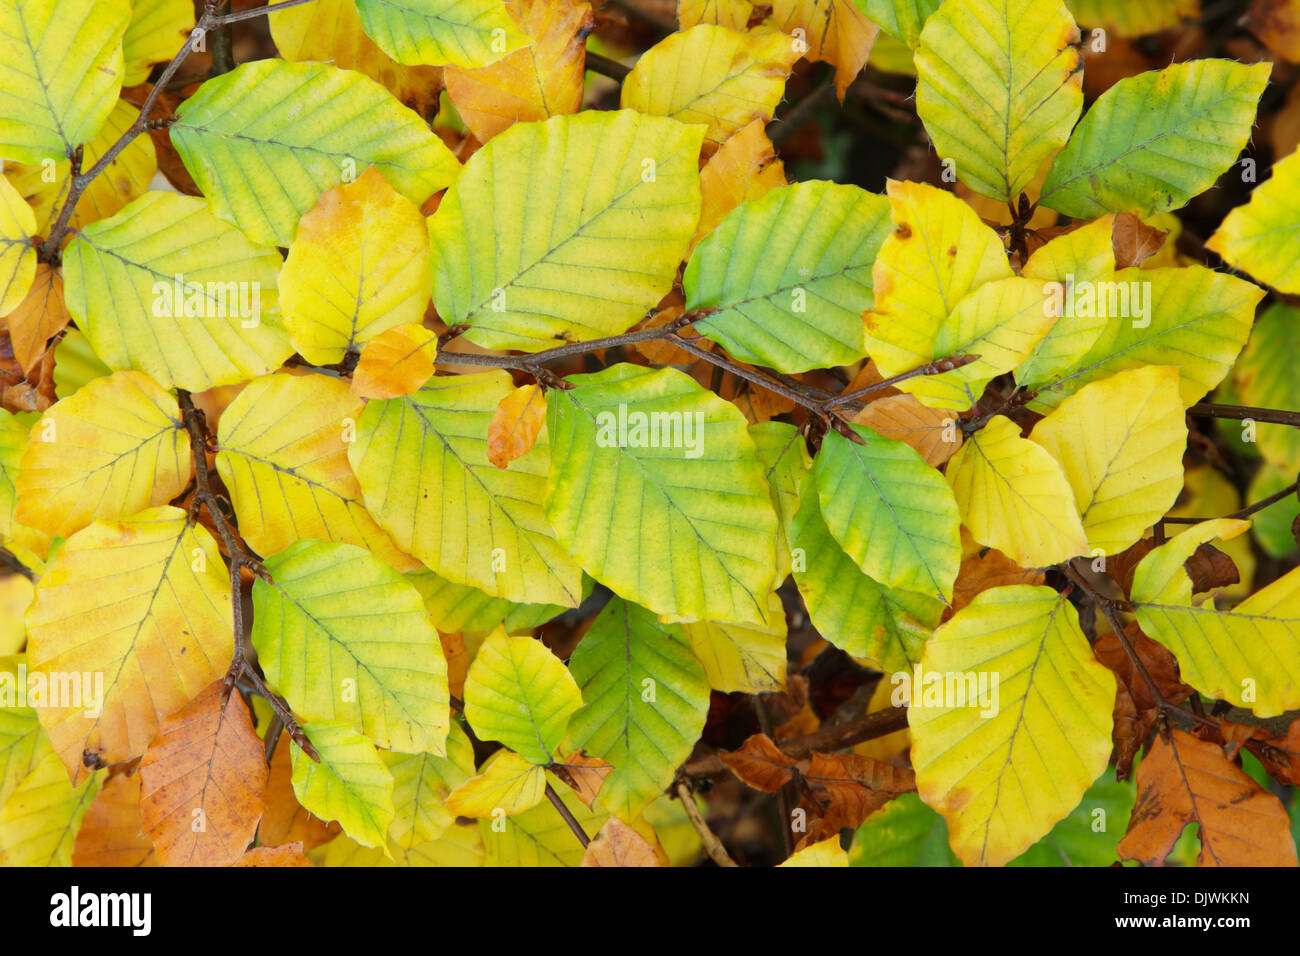 Common beech tree leaves, latin name Fagus sylvatica, in the porcess of turning yellow during autumn Stock Photo